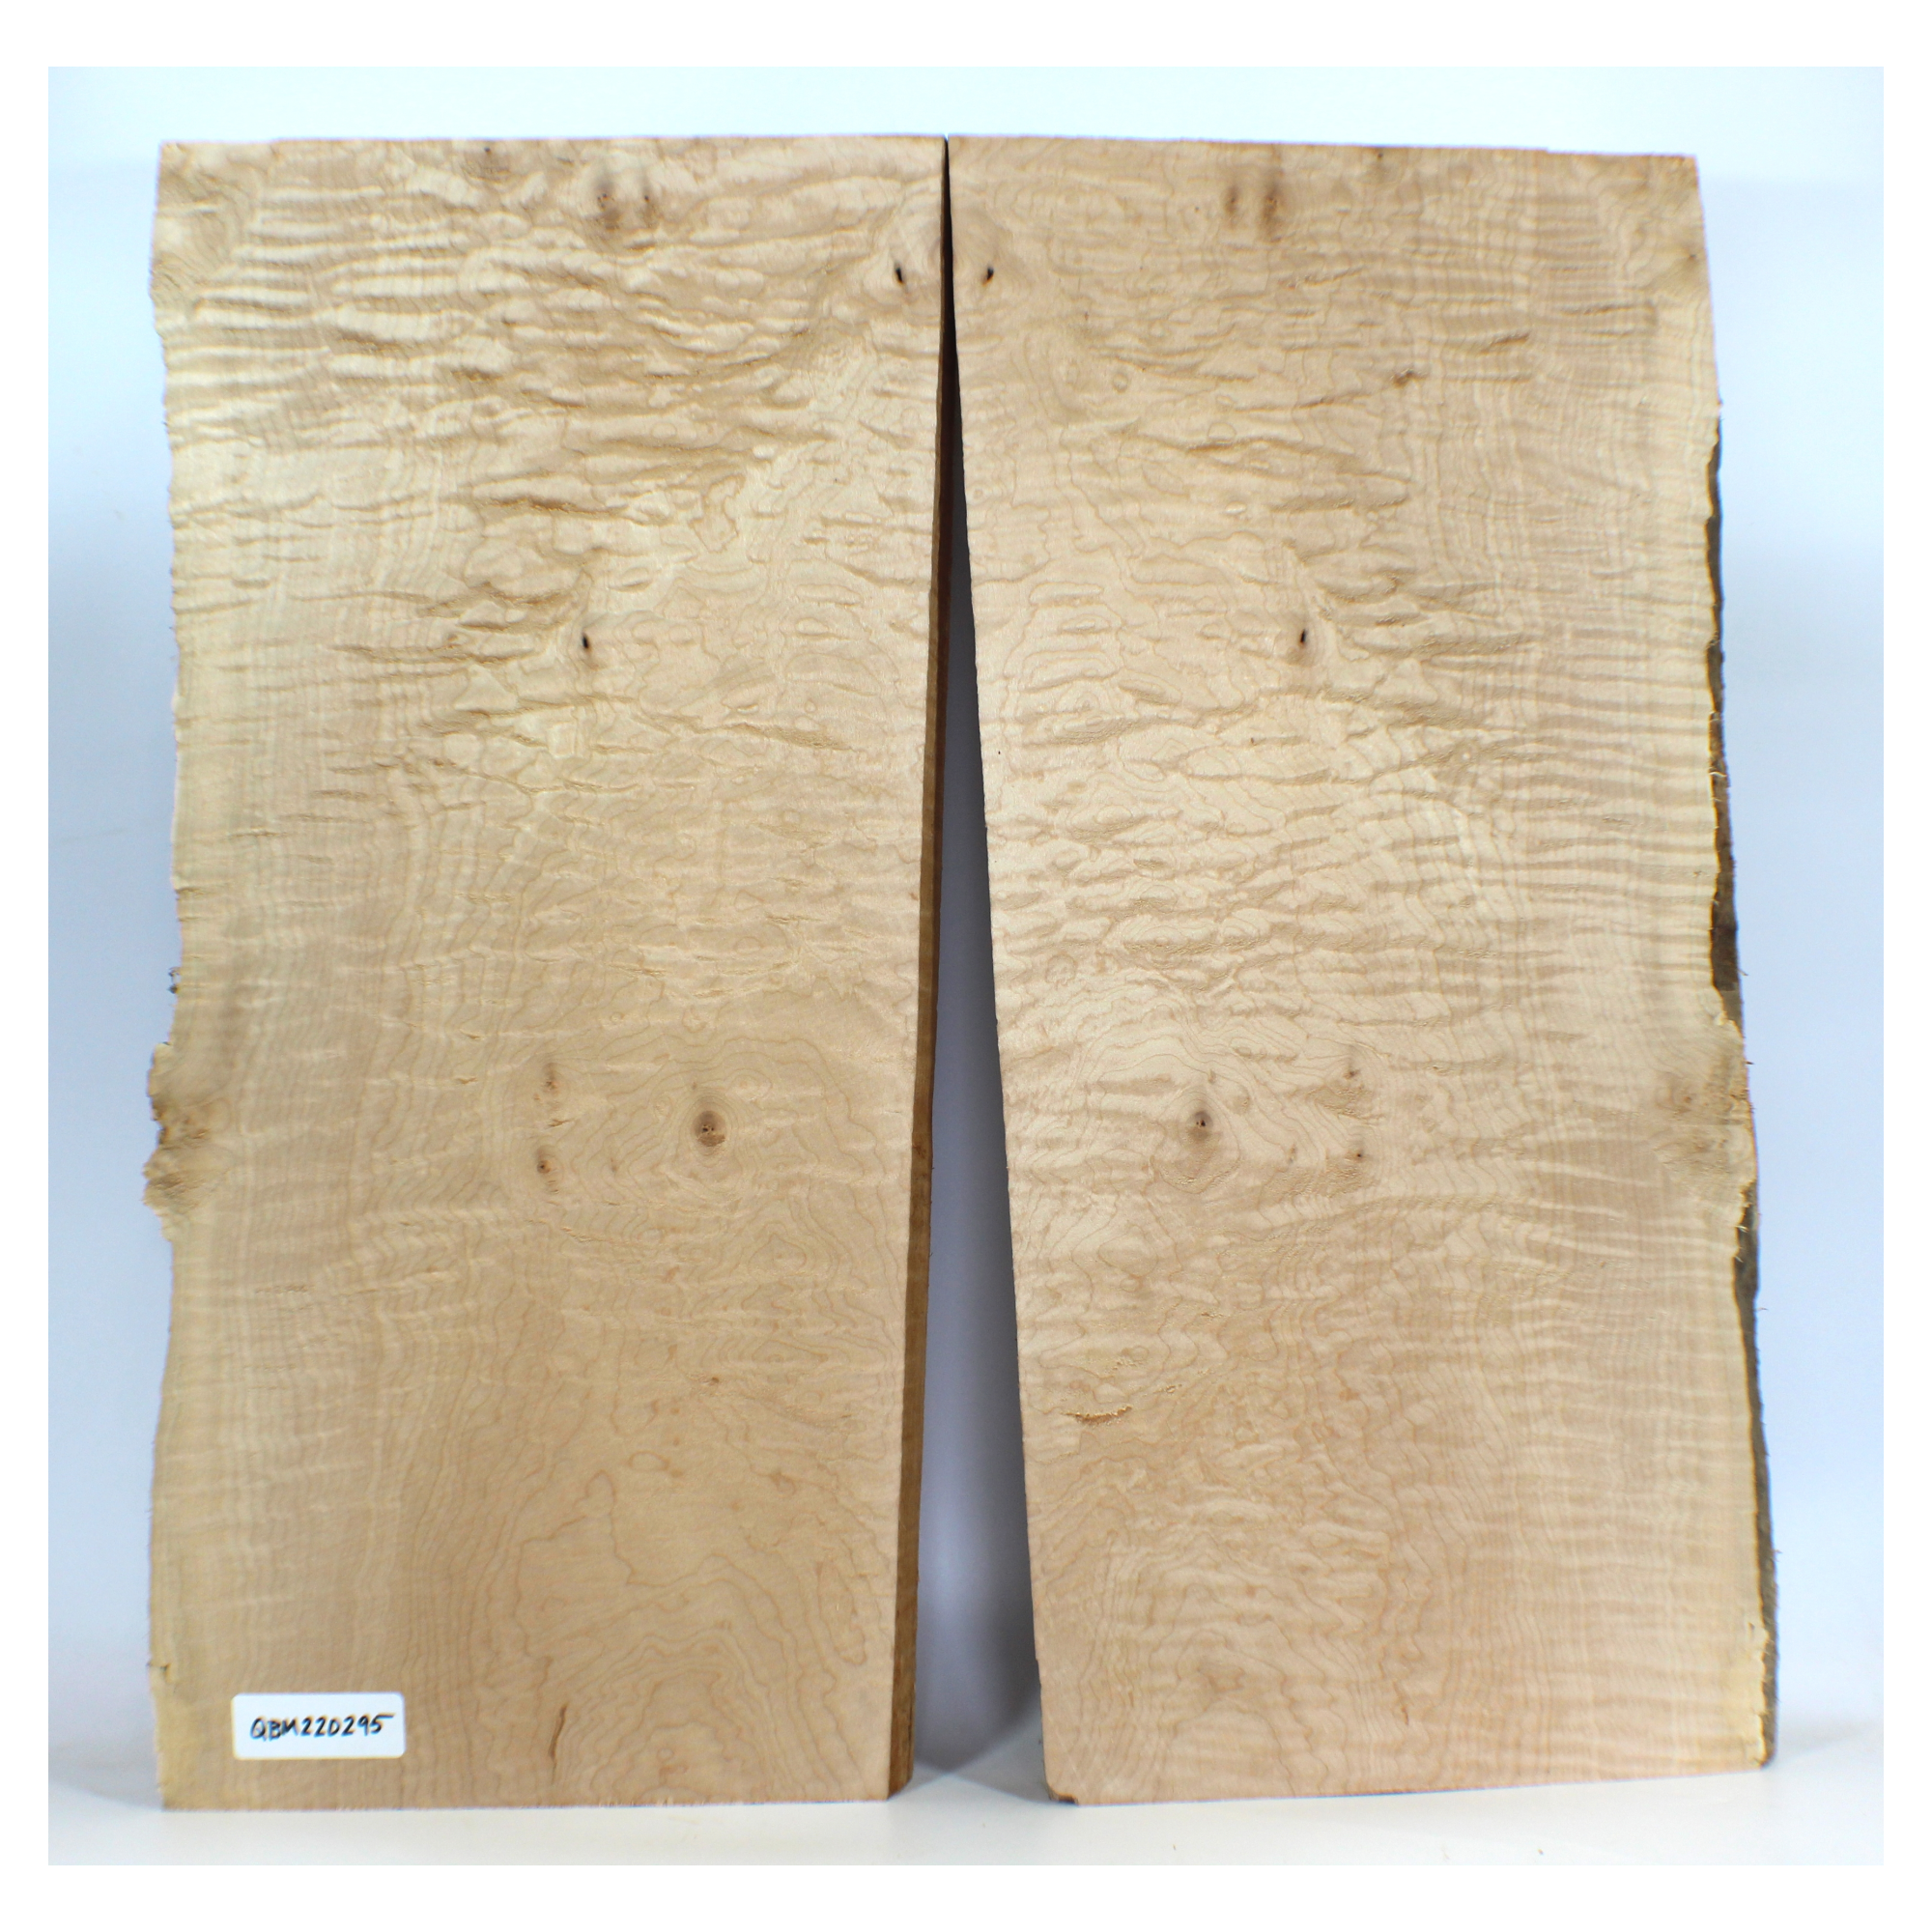 Interesting quilted maple 2-piece set with high grade figure and scattered burls and bird pecks throughout.  Dimensions: Thickness each piece: 1.25